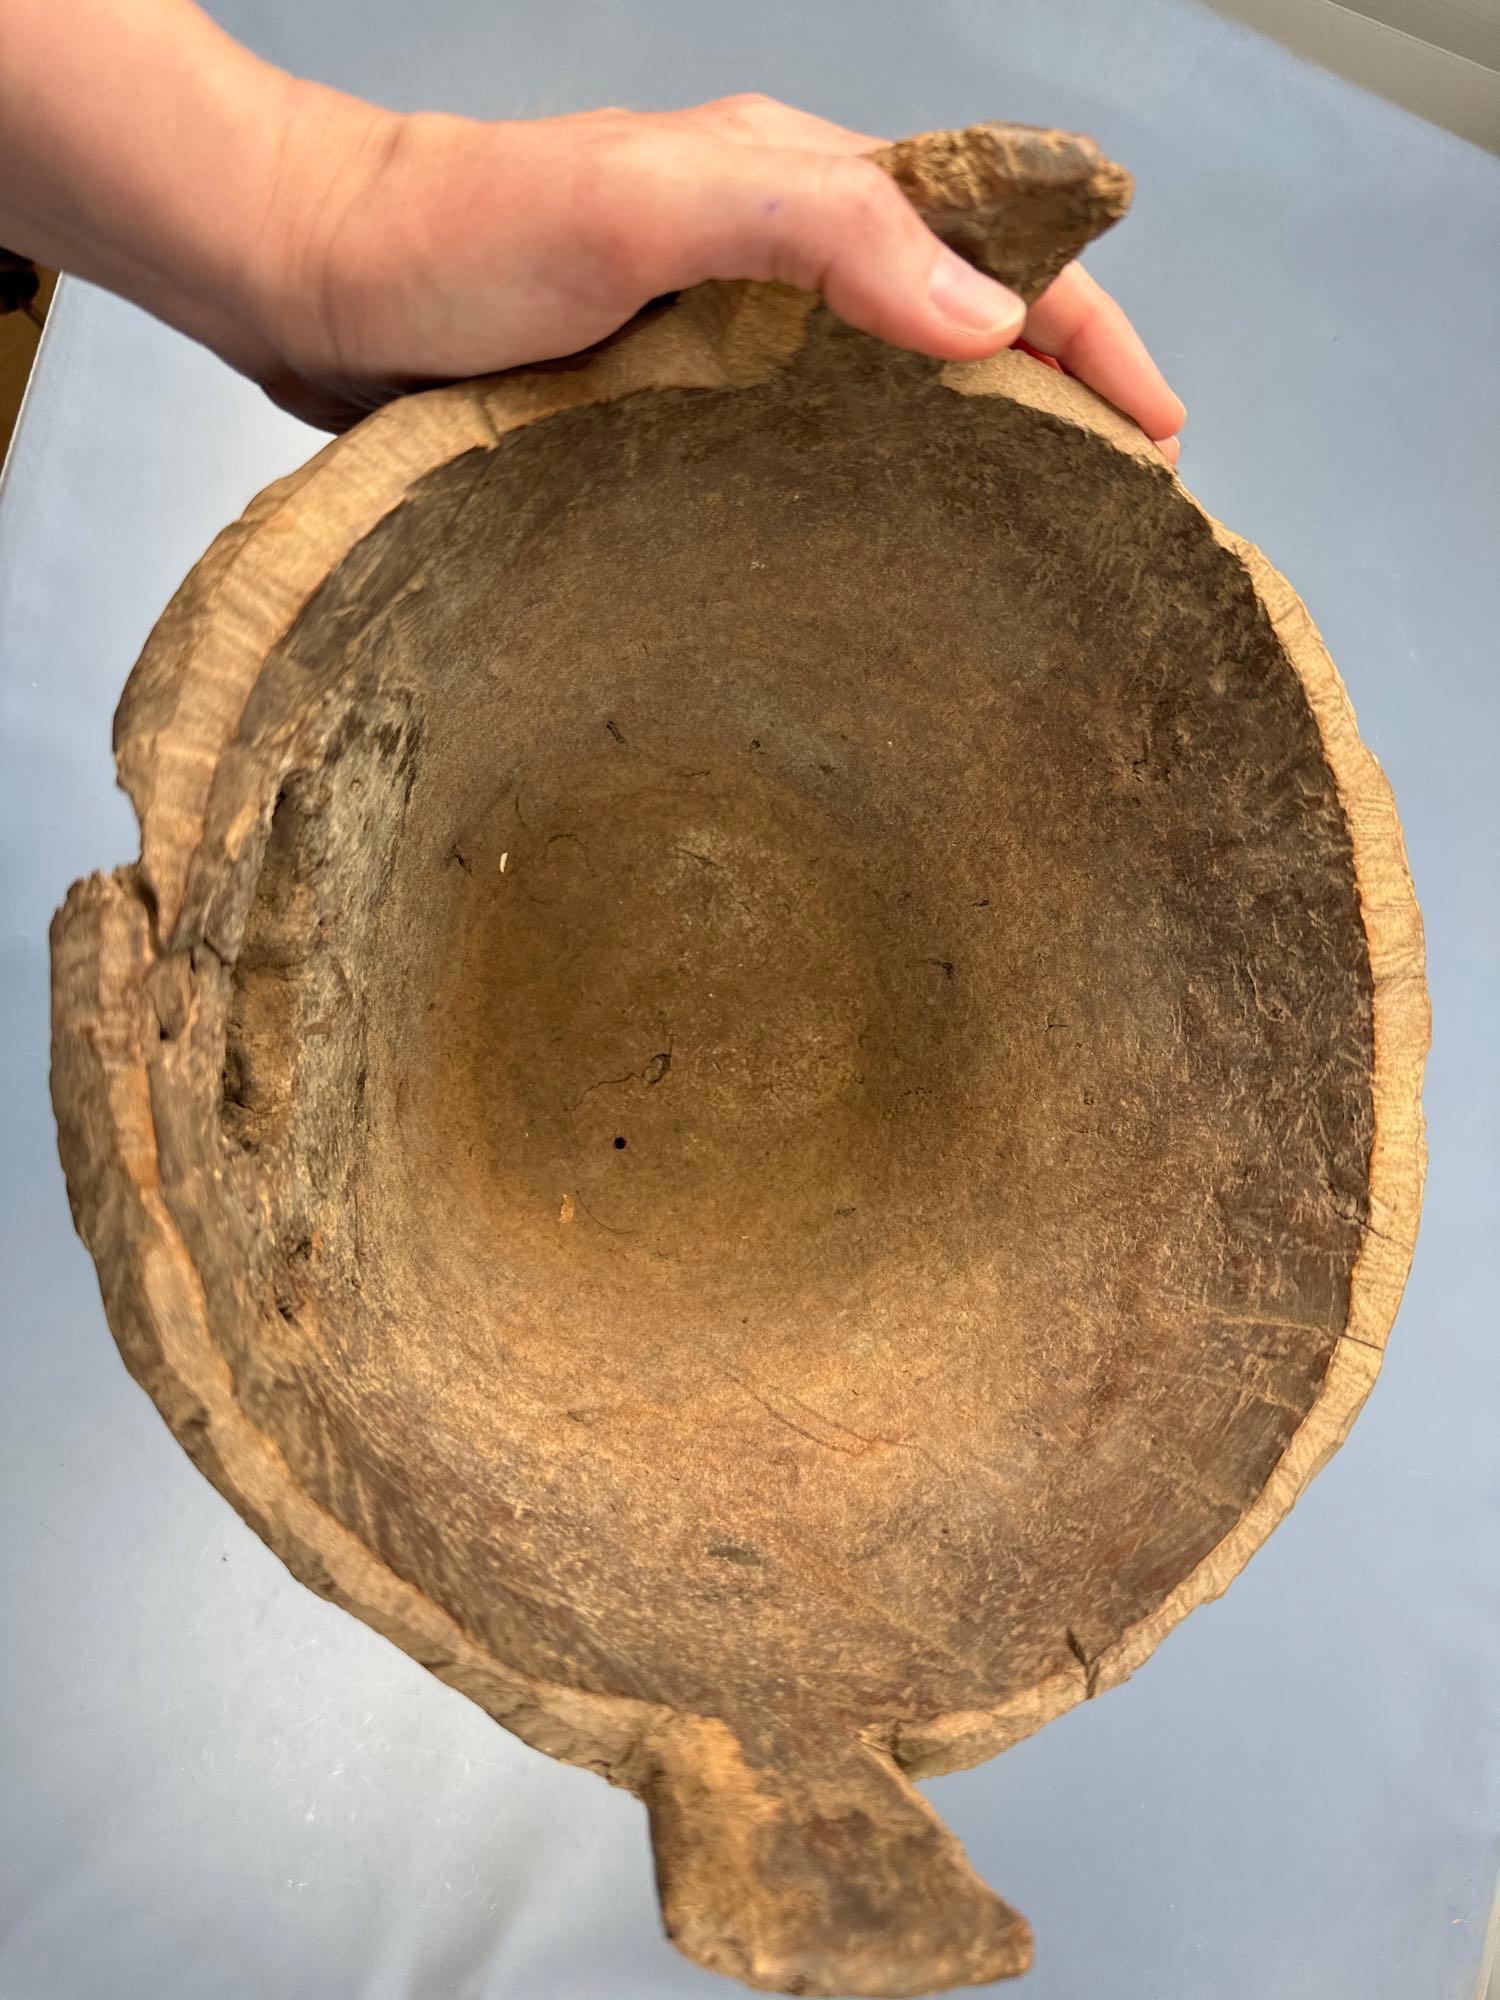 Exceedingly Rare Red Cedar Burl Bowl, Columbia River Salmon Mortar, Early 1800's (Possibly Older), 1